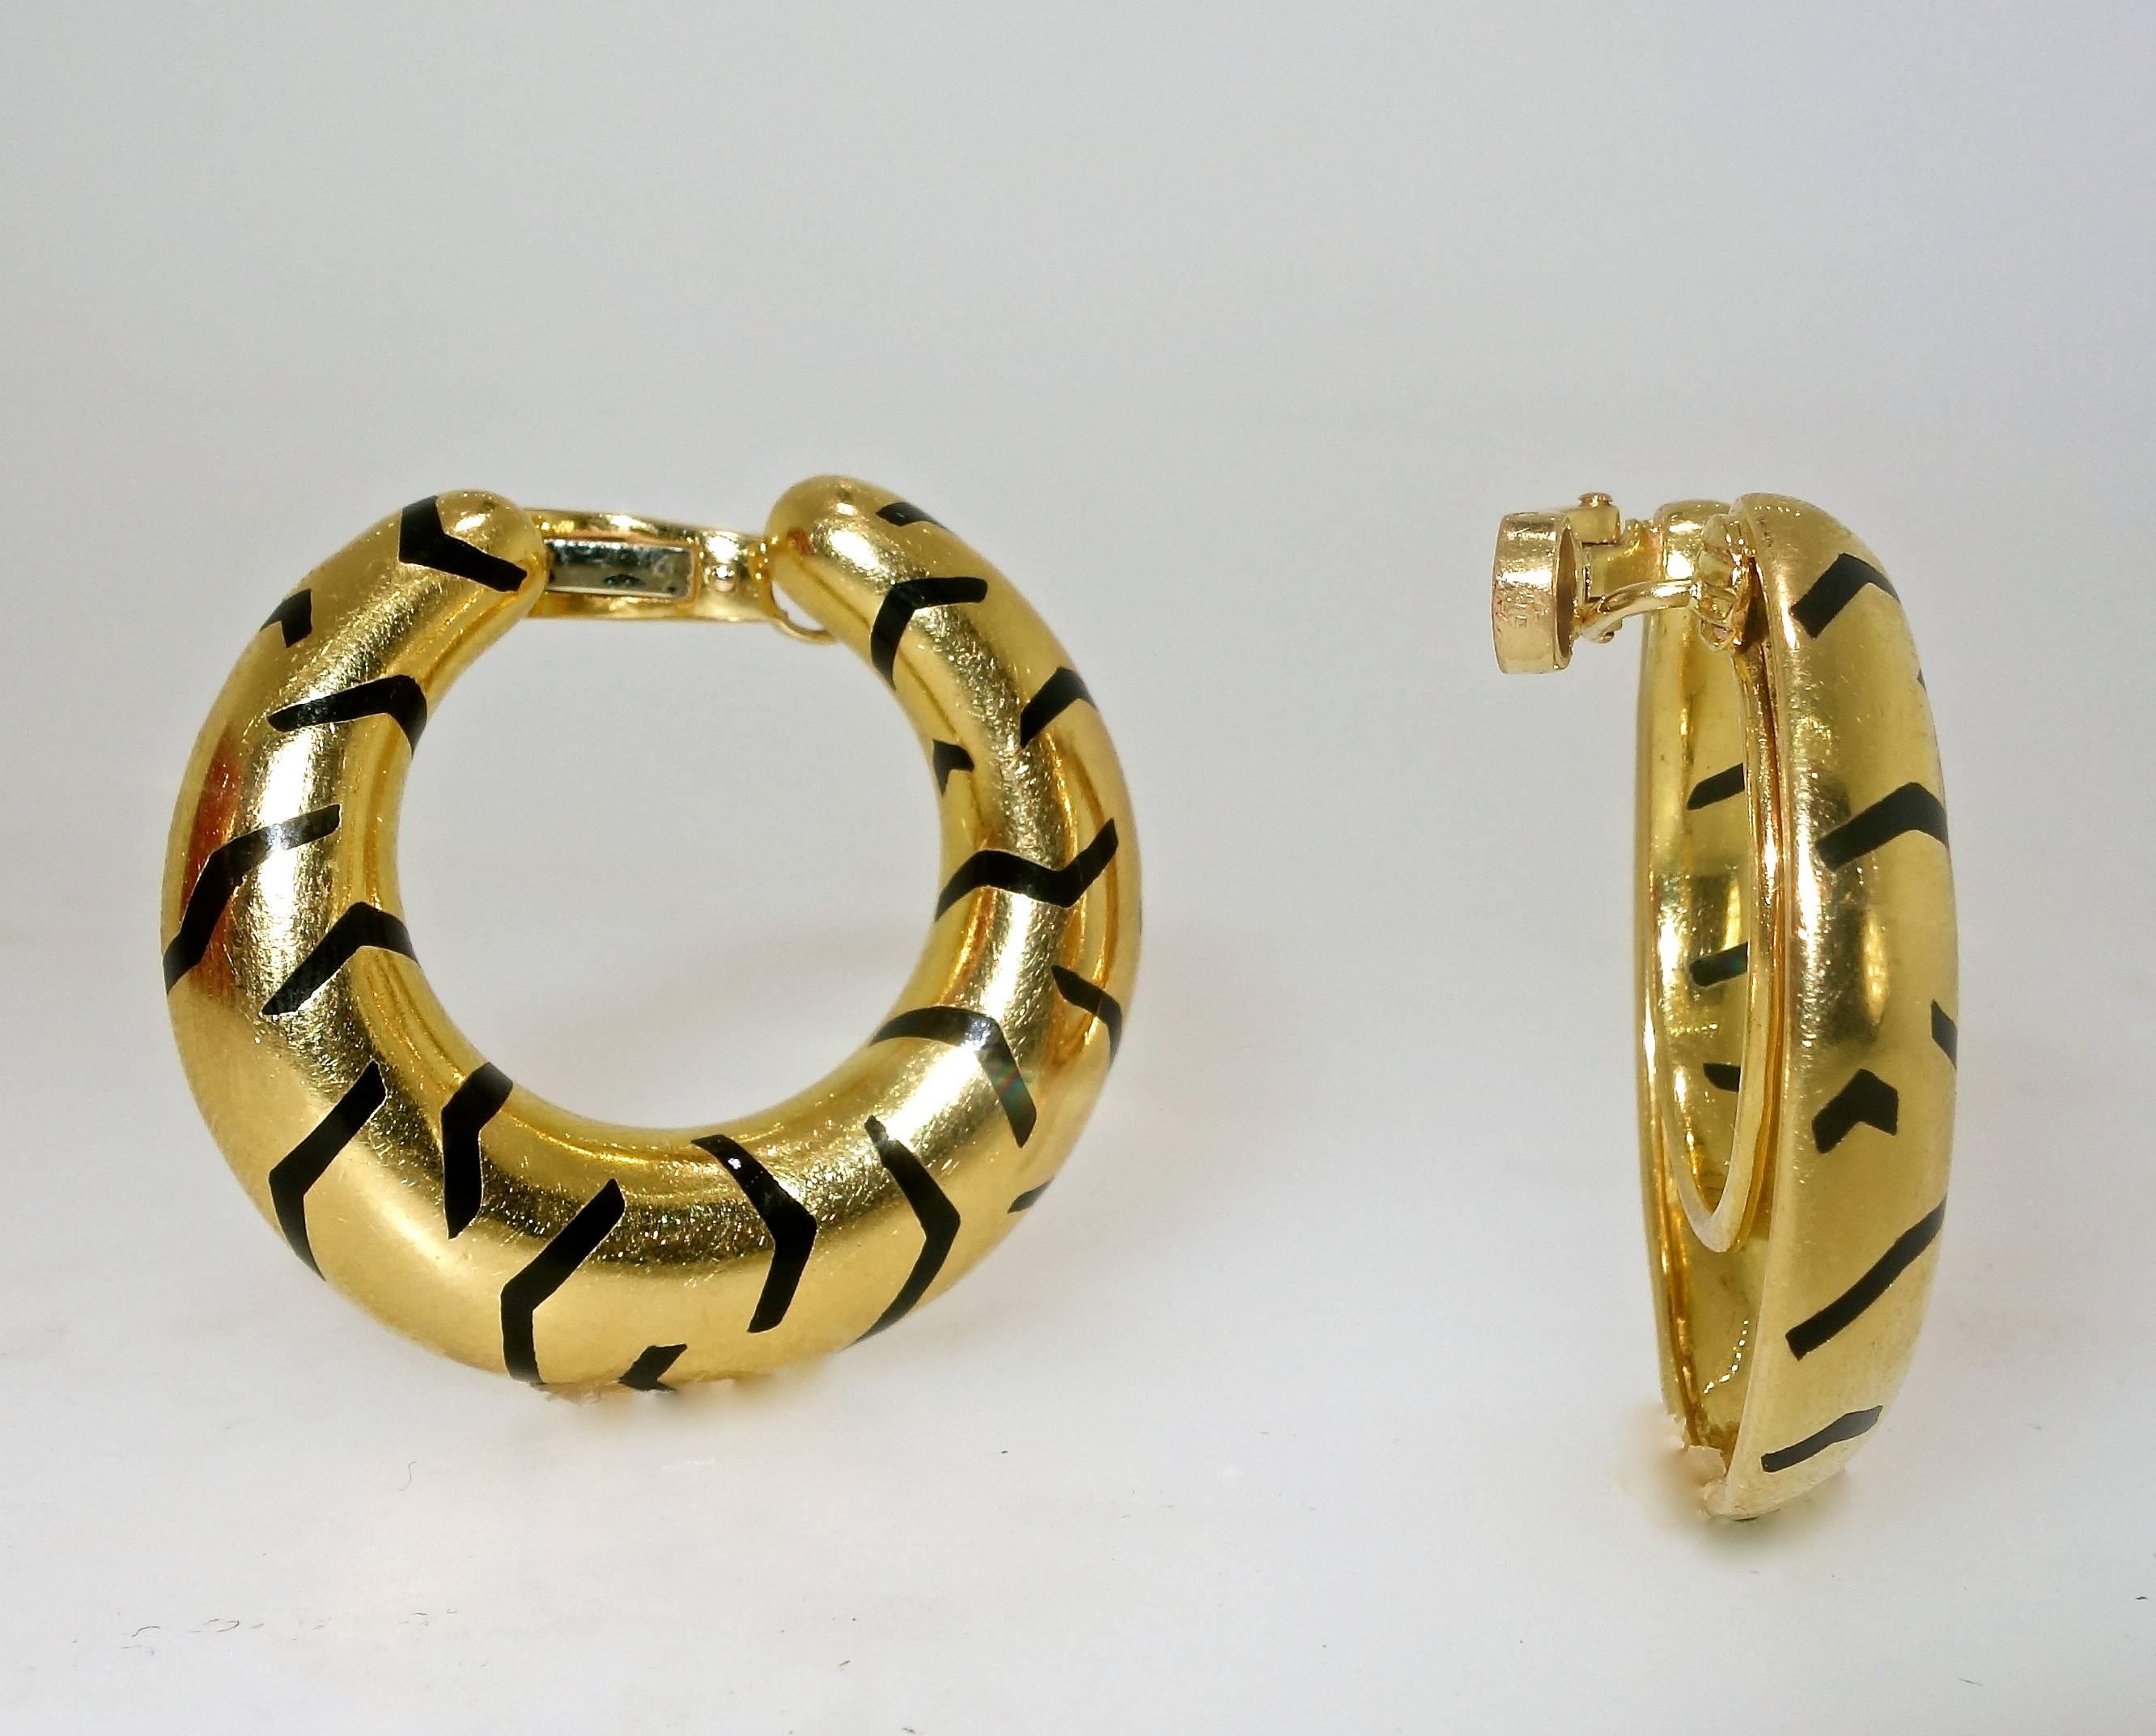 From their "Big Cat" jewelry, these Cartier black enamel striped hoops are 18K.  They are signed, numbered and possess French hallmarks.  They are 1.25 inches in diameter.  They can be for a pierced as well as a non pierced ear.